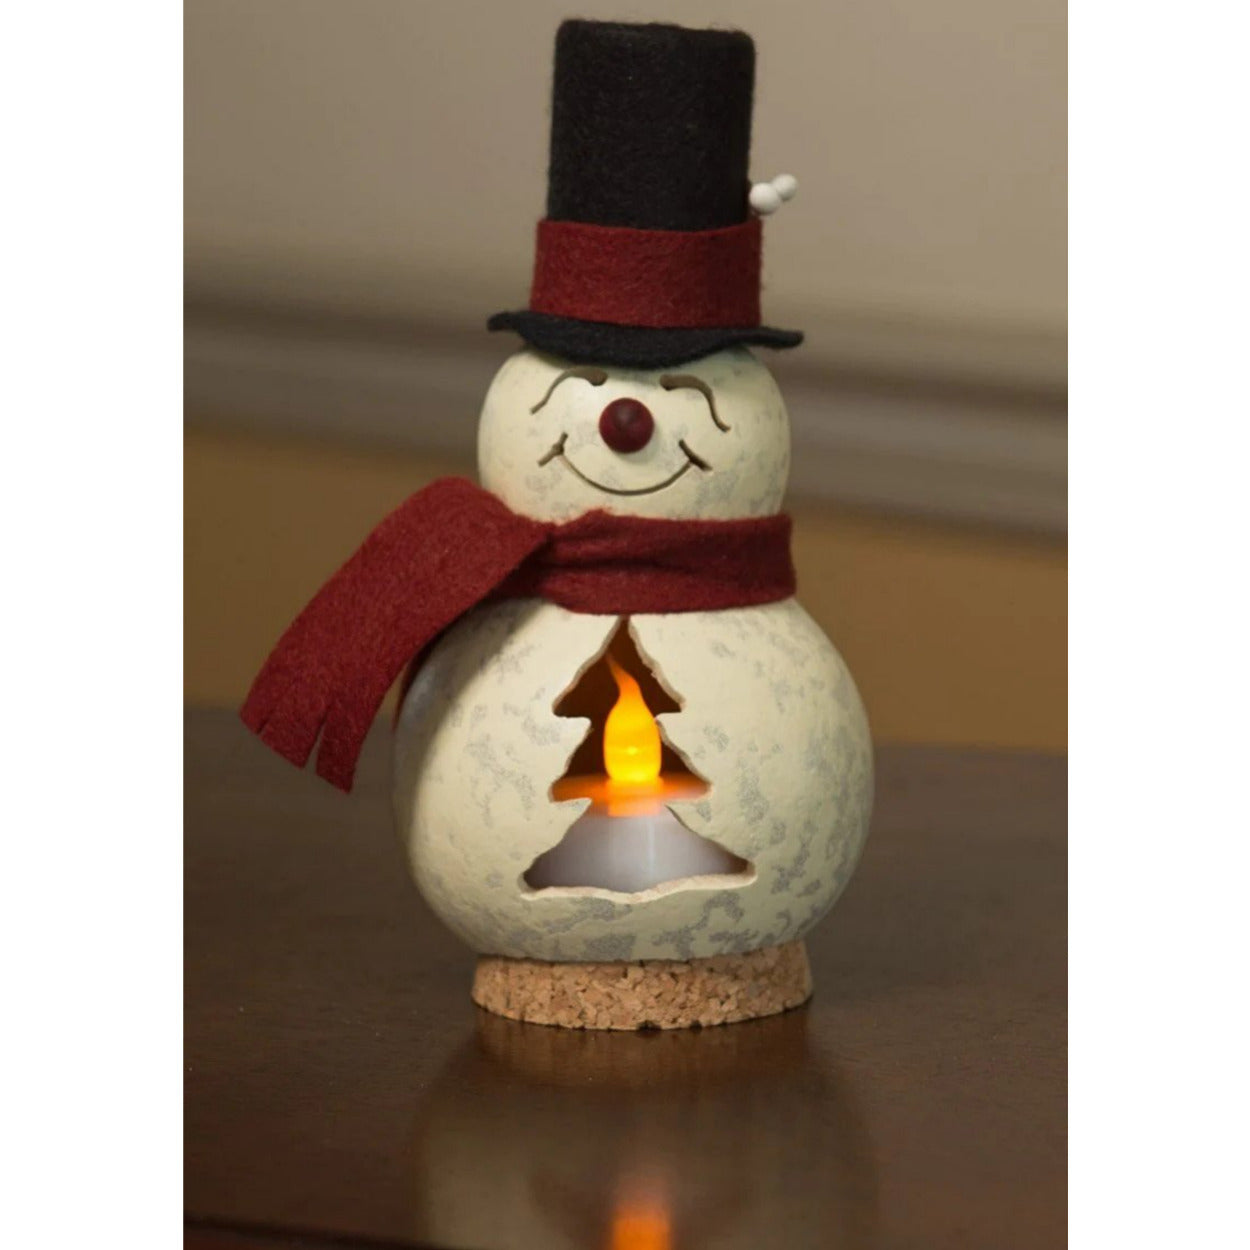 Easton the Snowman Miniature Handcrafted Gourd